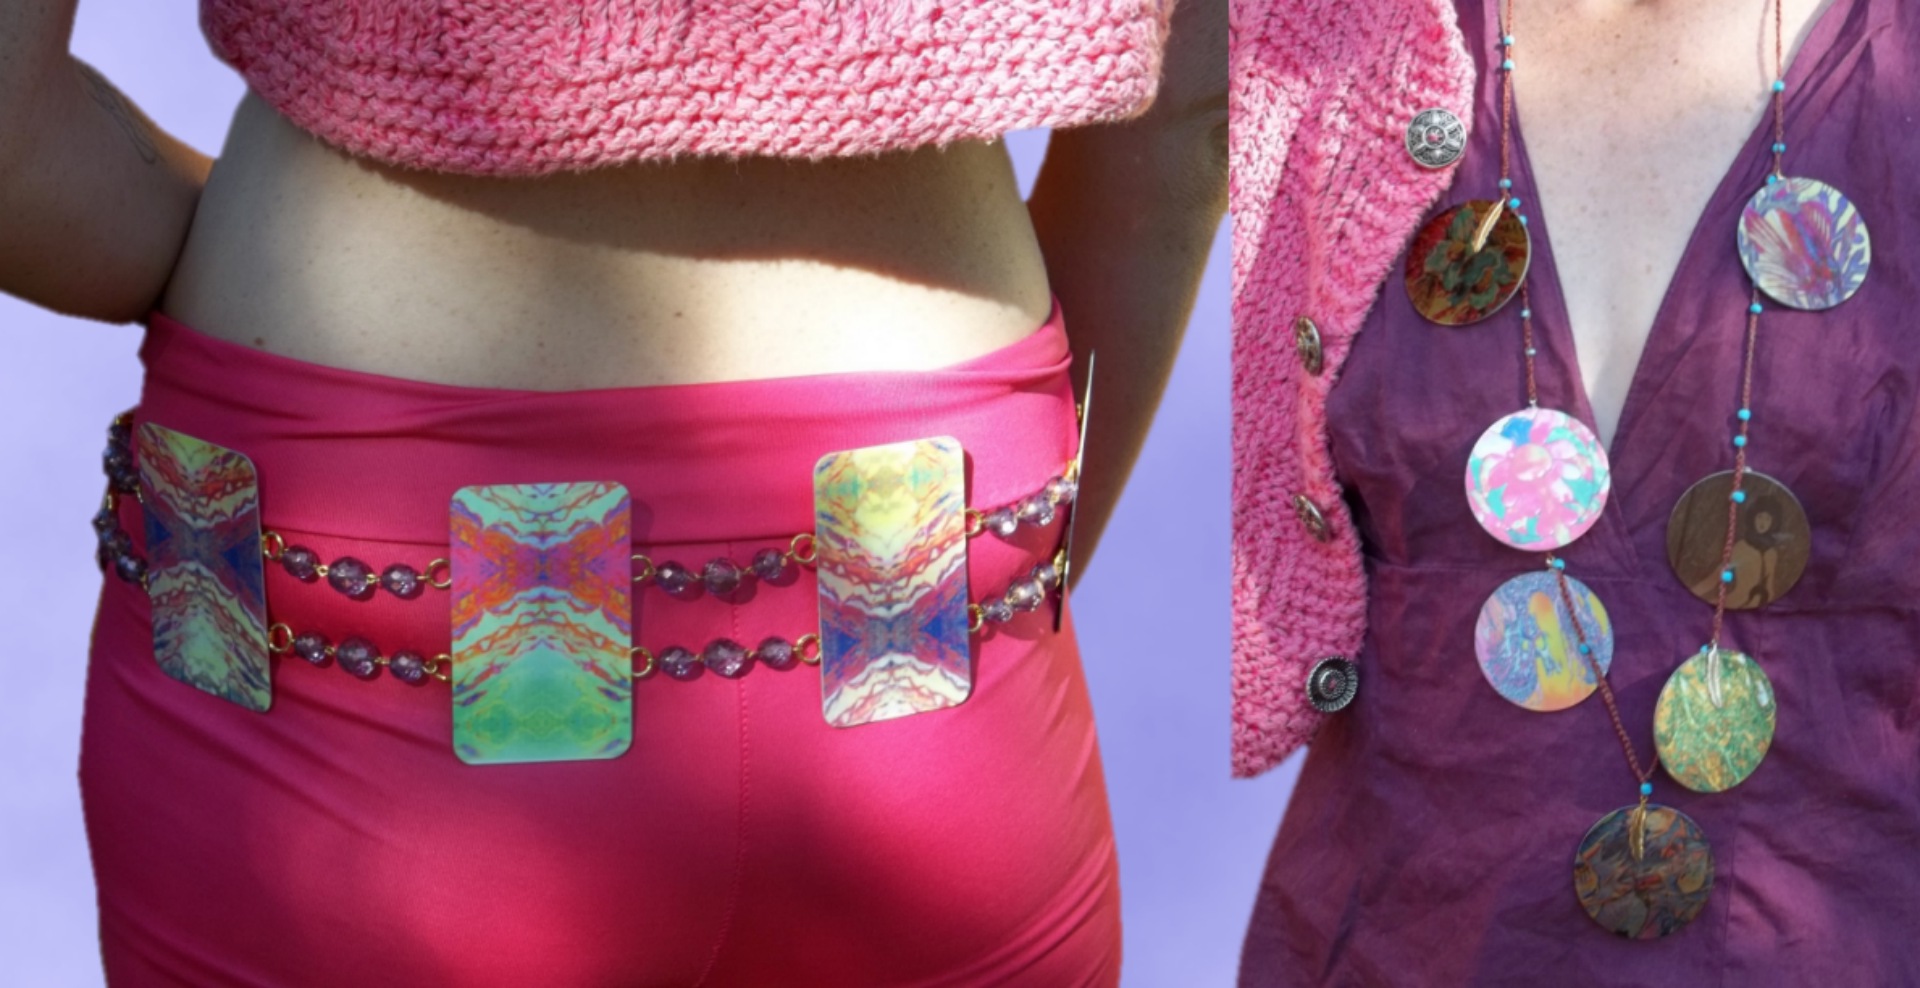 Metal Belt and Necklace made with sublimation printing